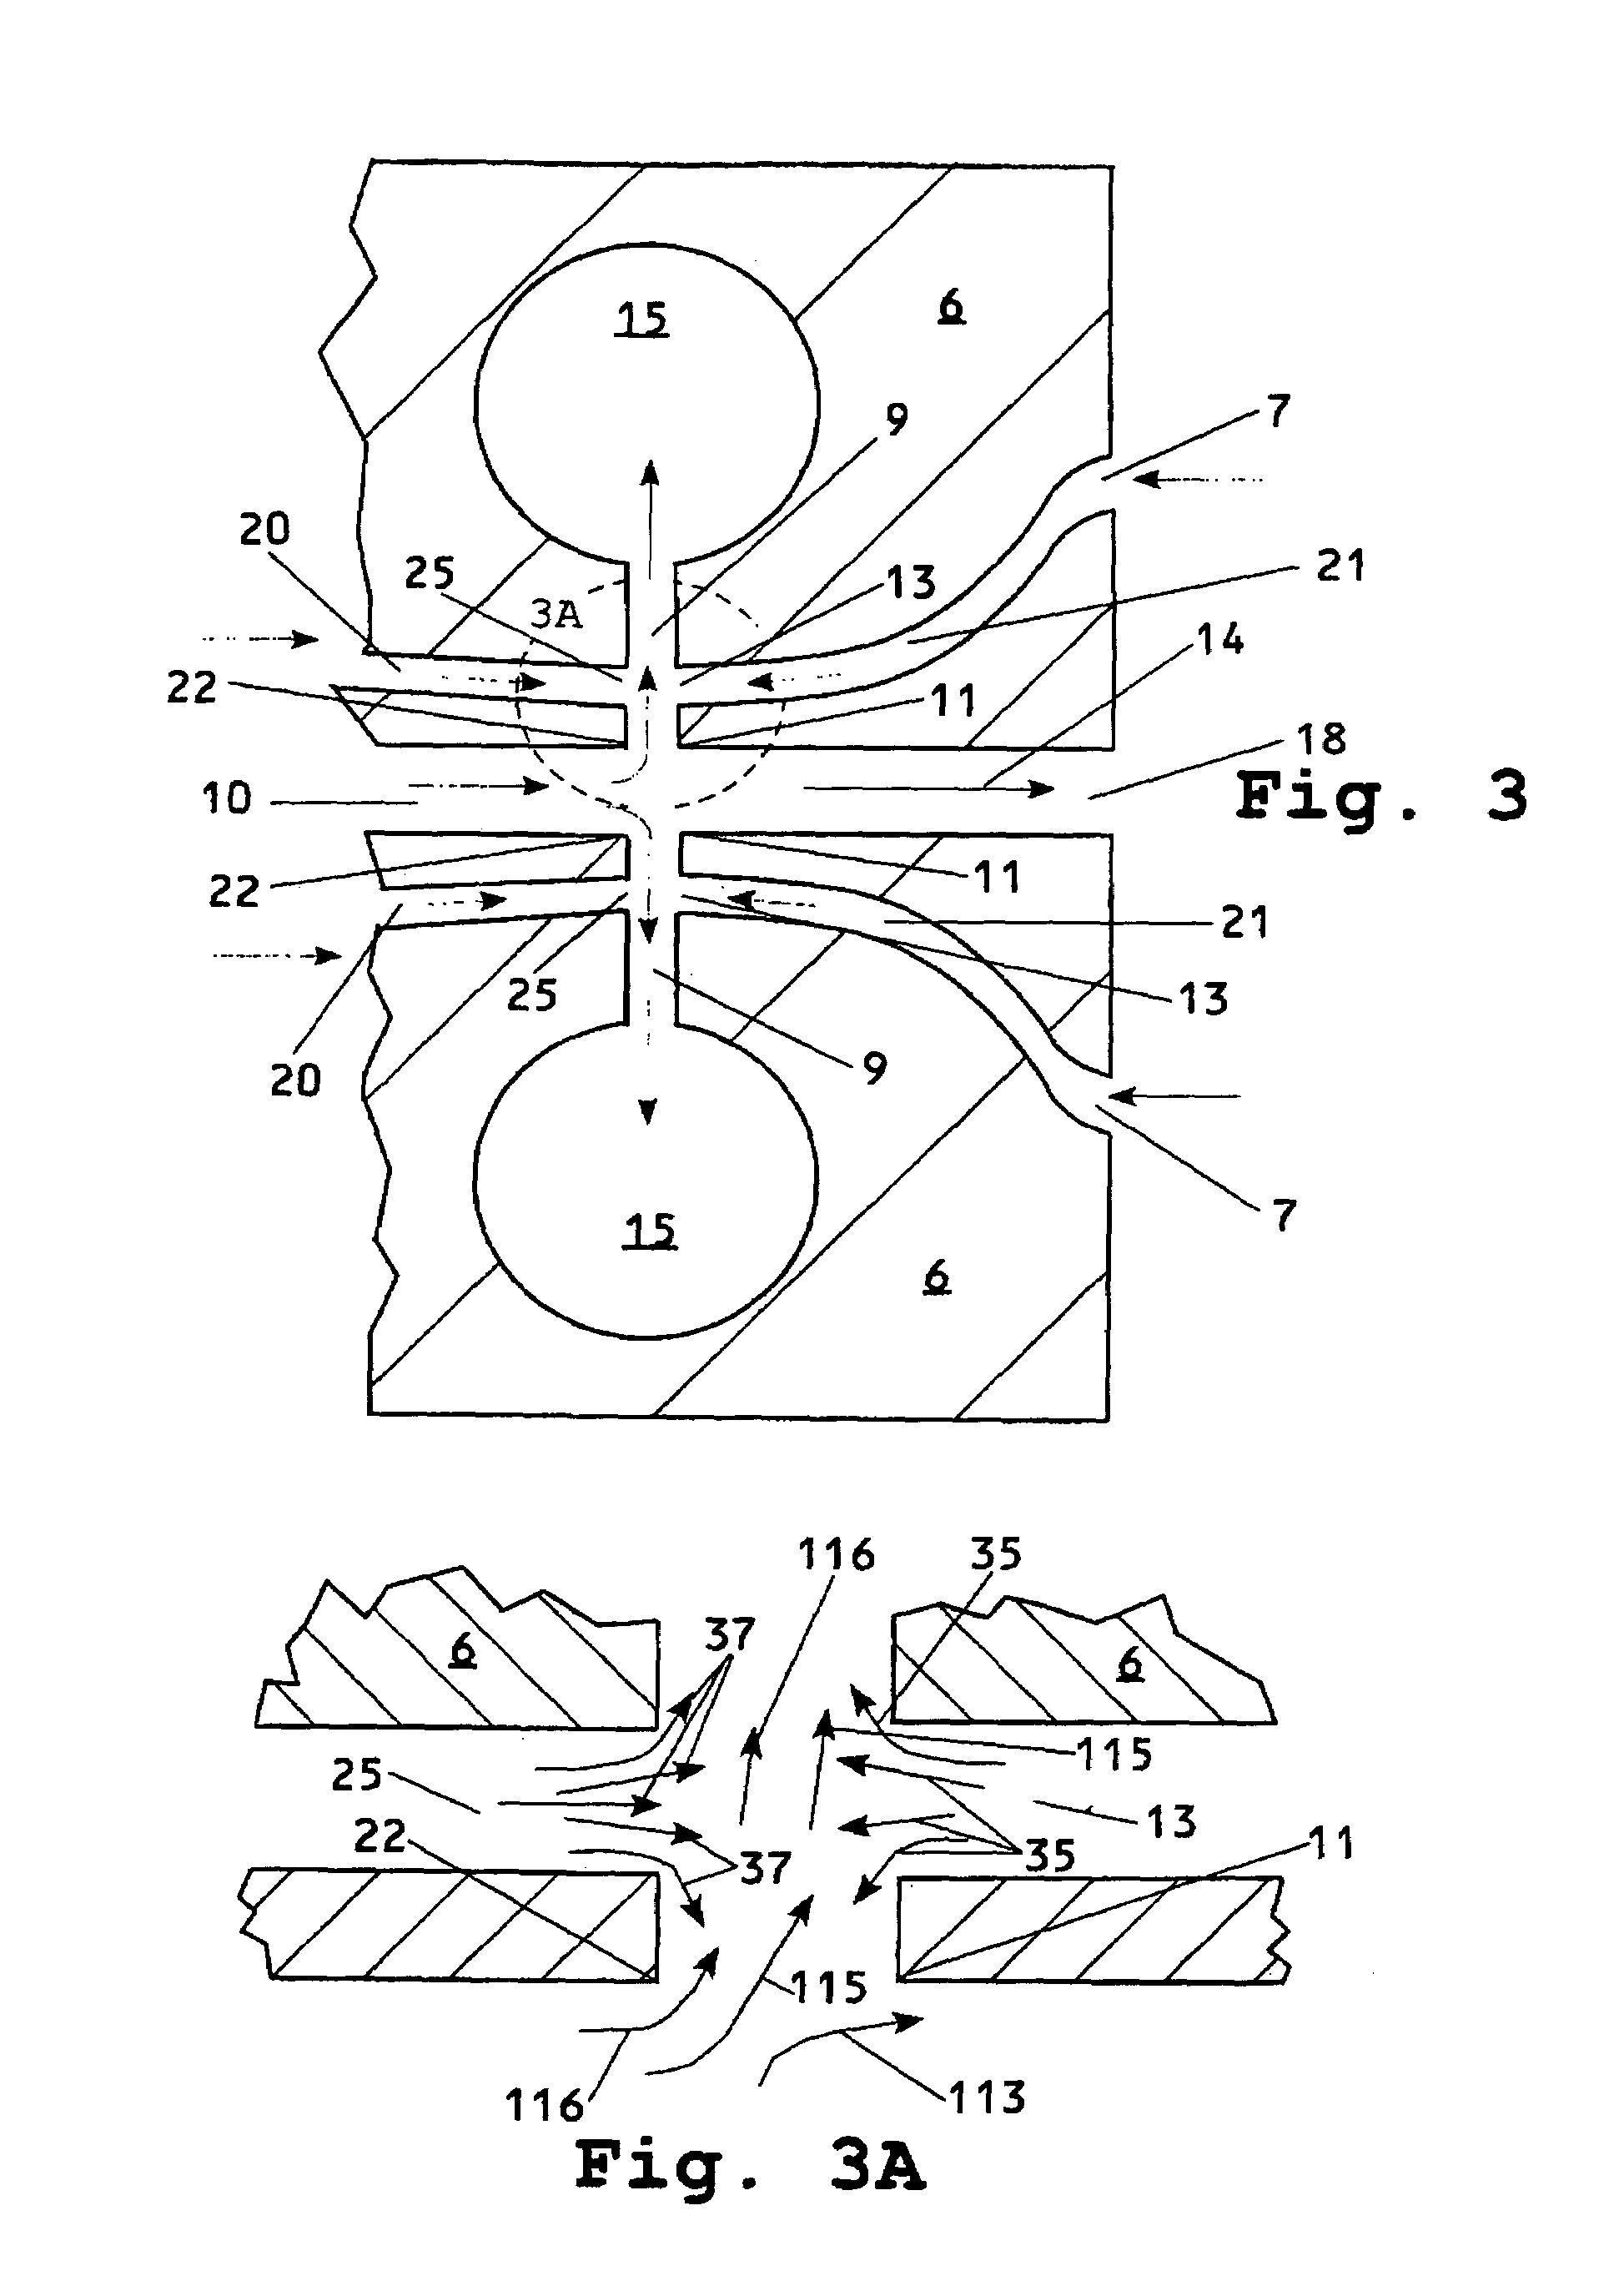 Virtual impactor device with reduced fouling